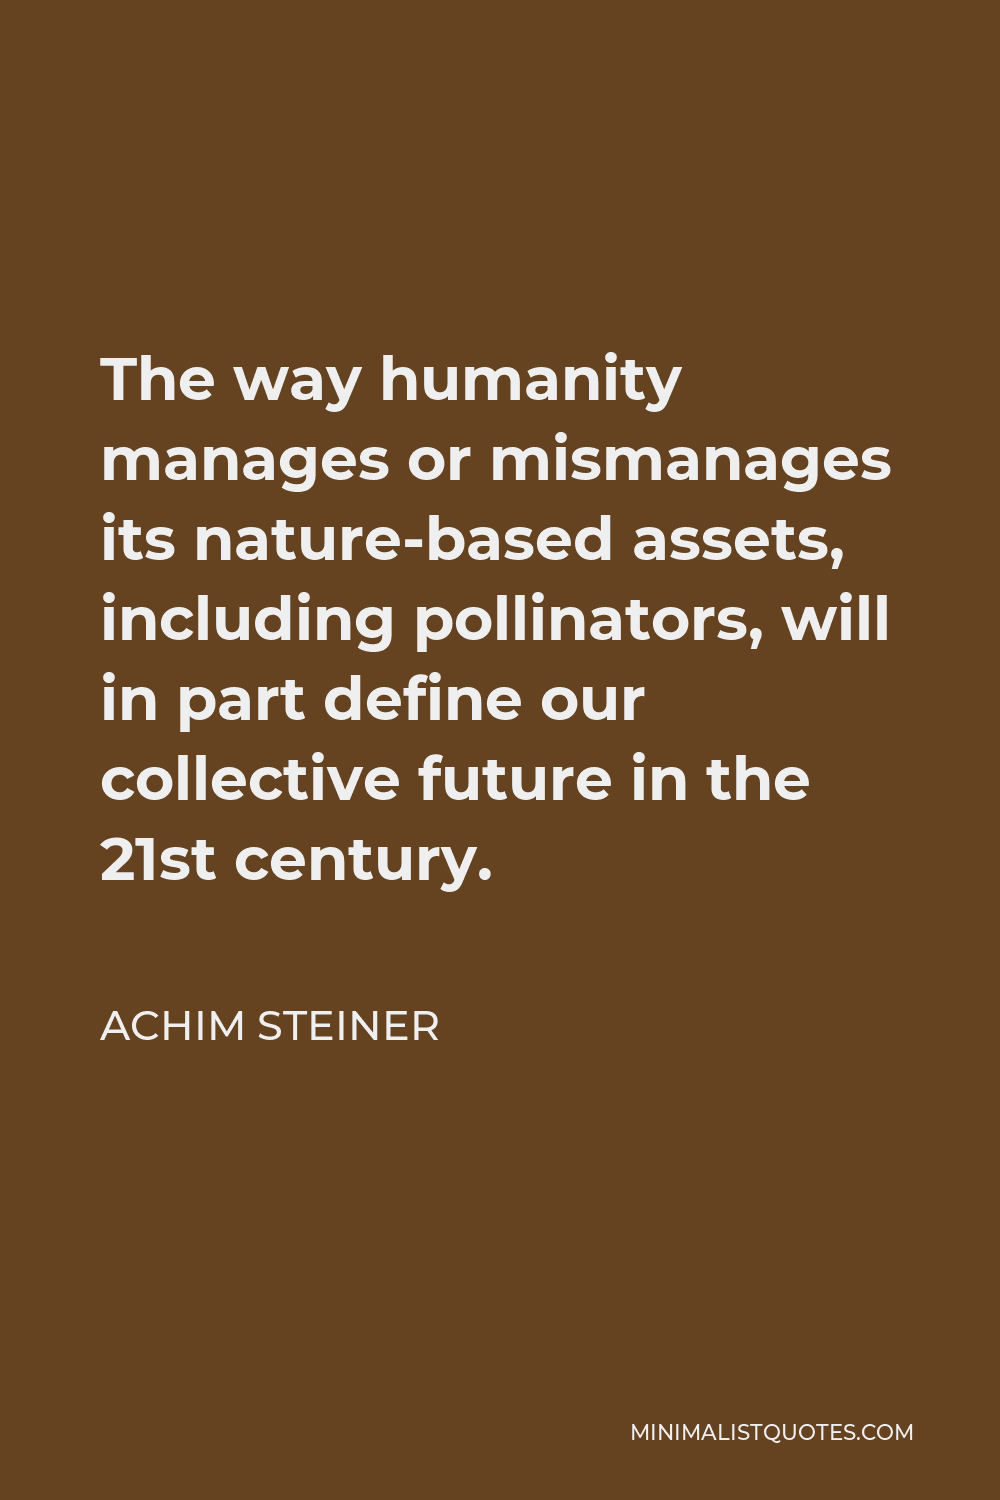 Achim Steiner Quote - The way humanity manages or mismanages its nature-based assets, including pollinators, will in part define our collective future in the 21st century.